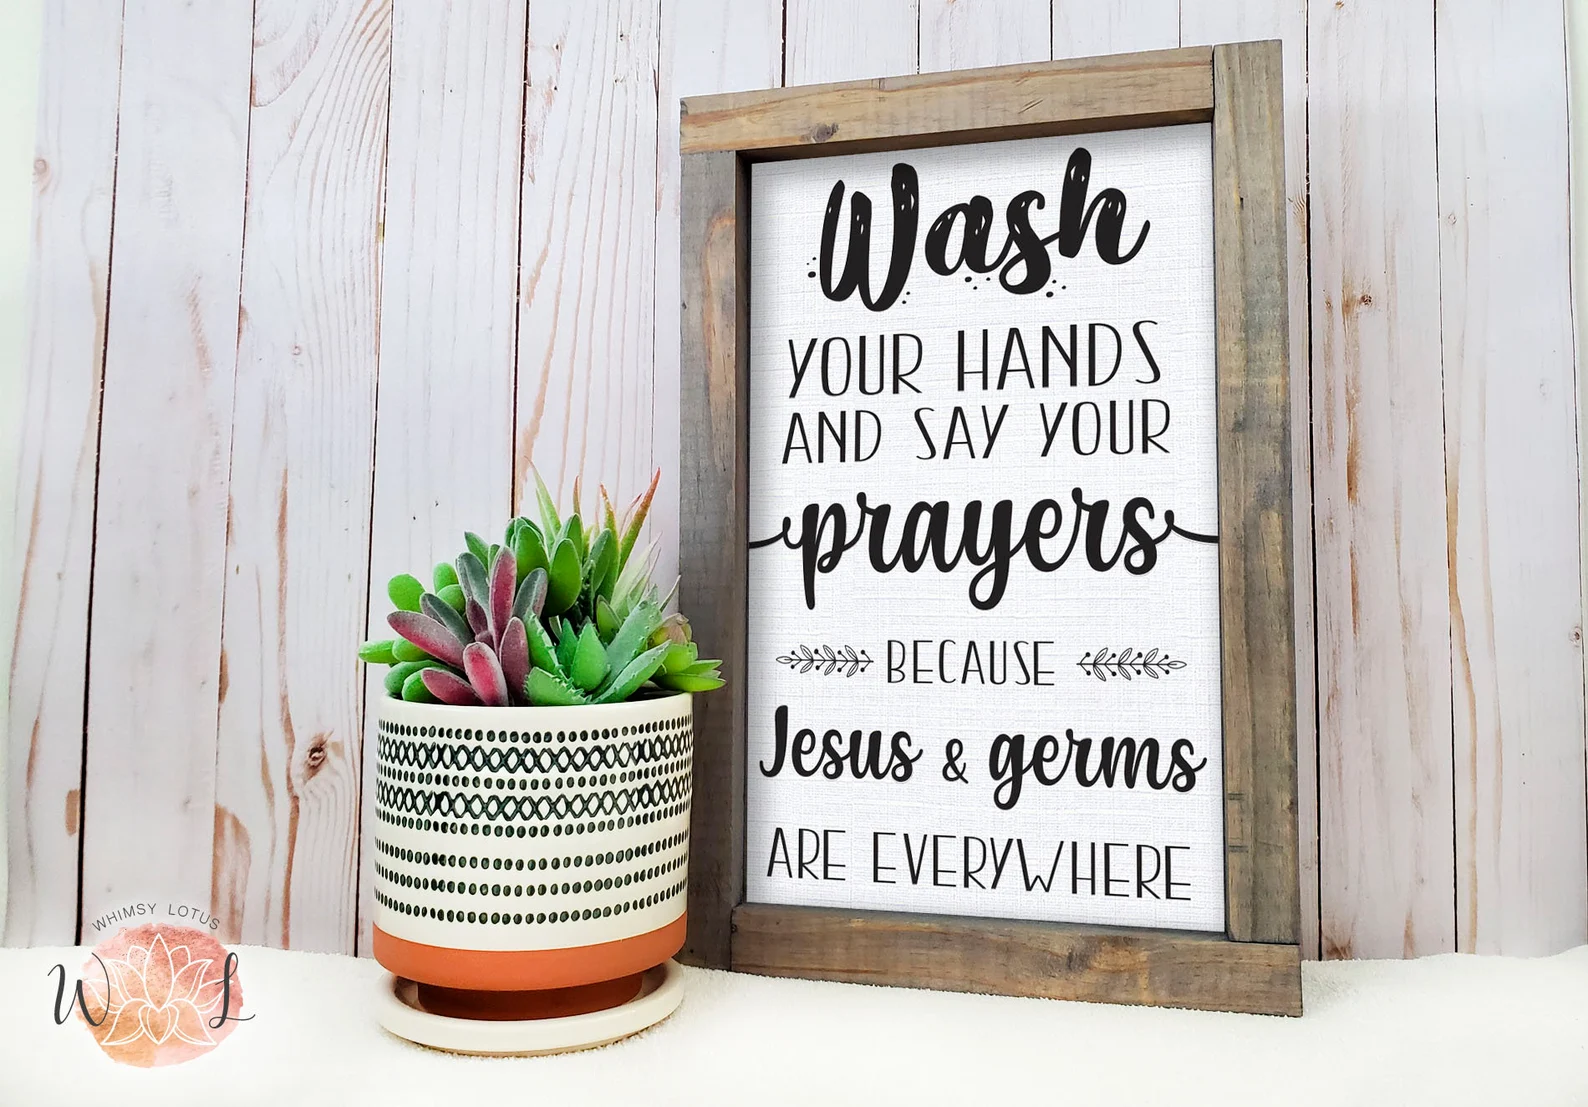 Bathroom Sign - wash your hands and say your prayers.